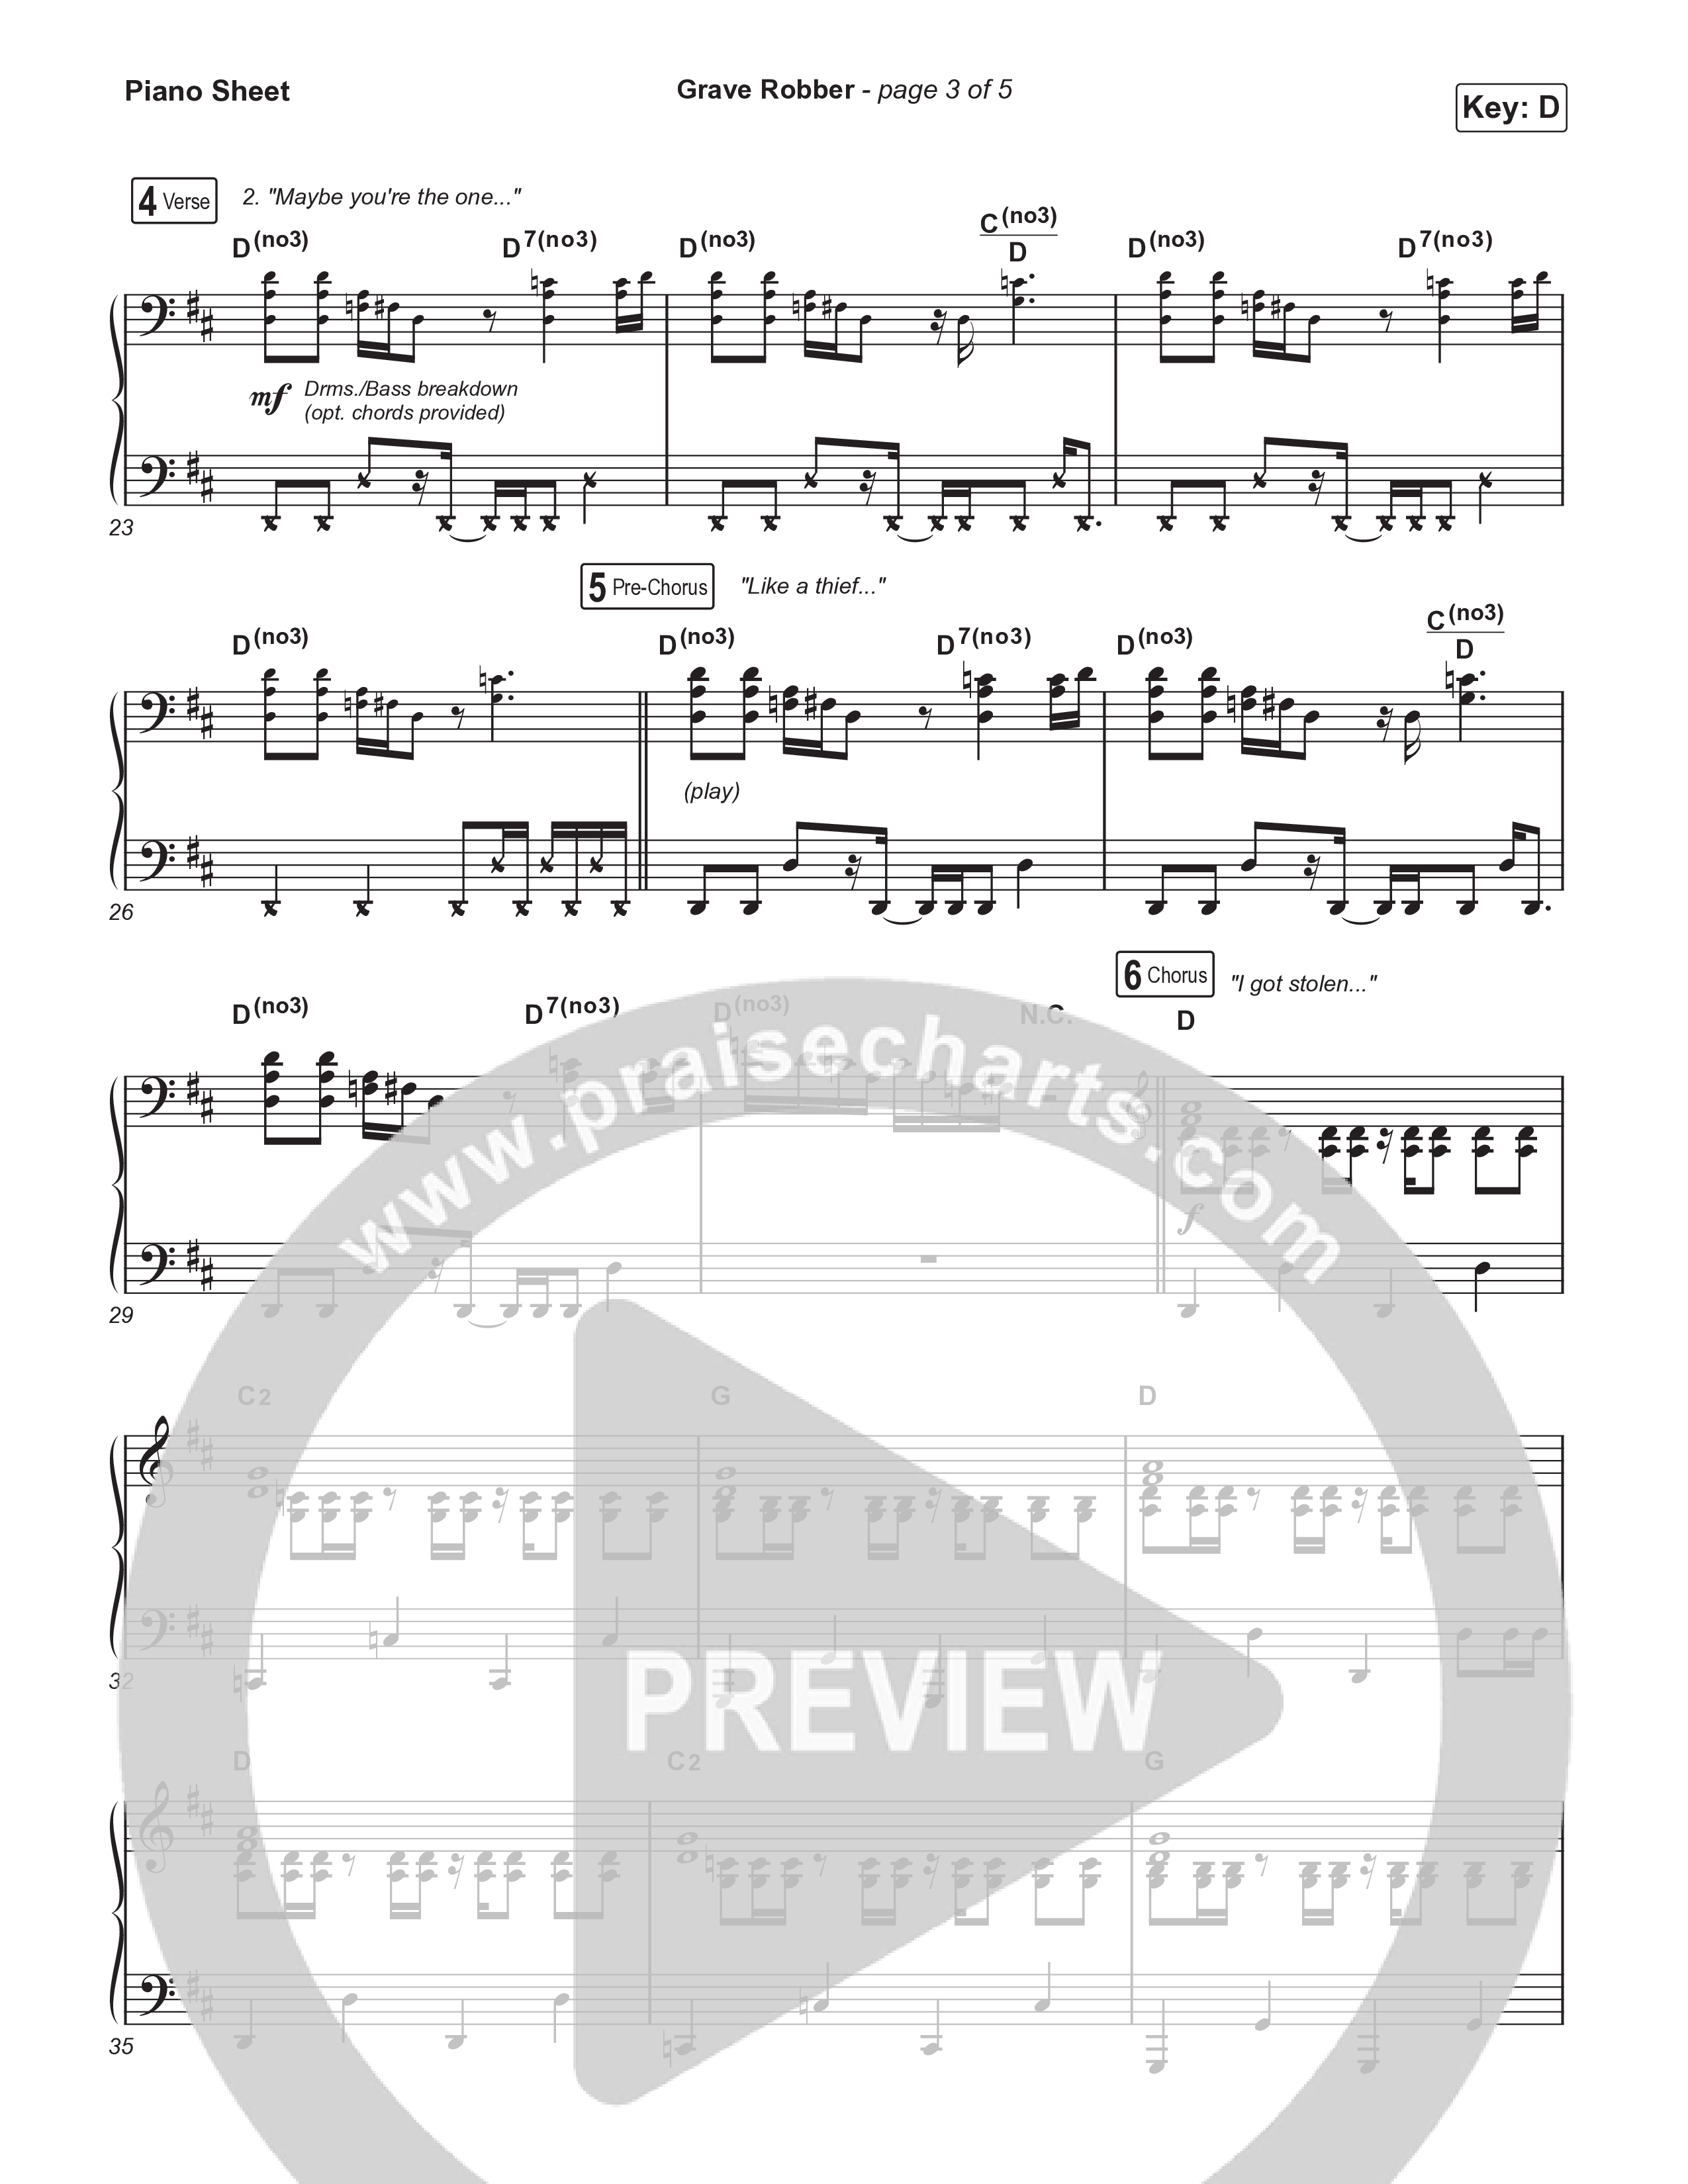 Grave Robber Piano Sheet (Crowder)